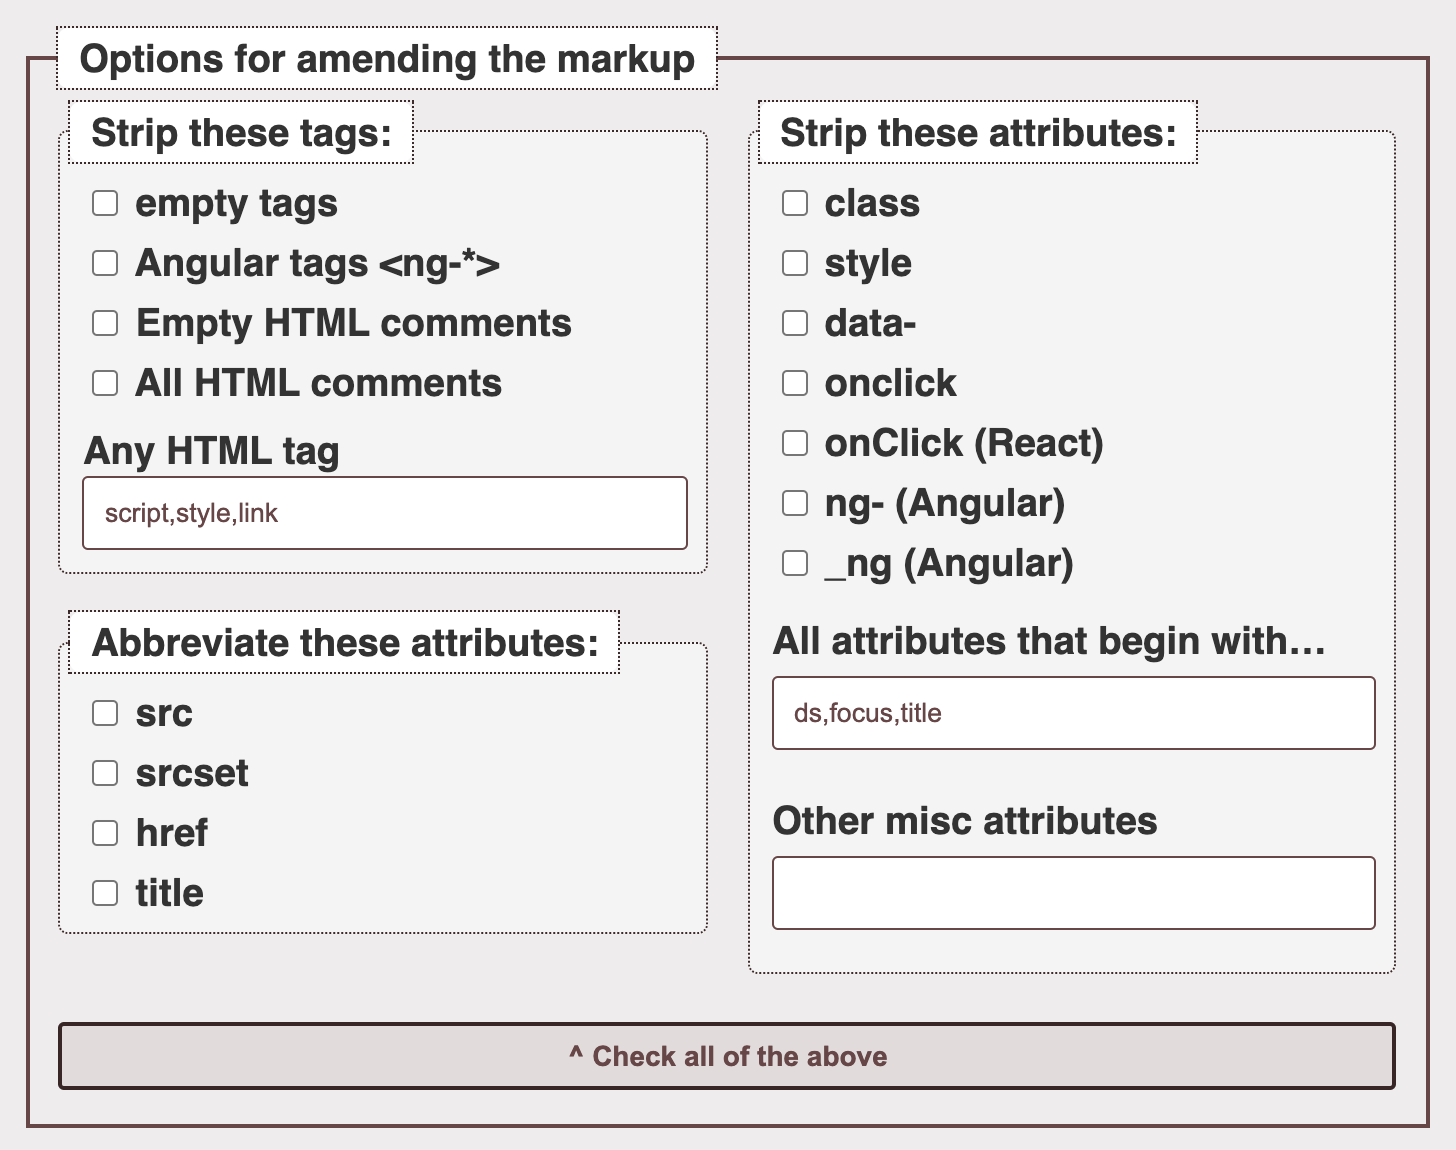 De-crapulator options to remove attributes, tags and comments